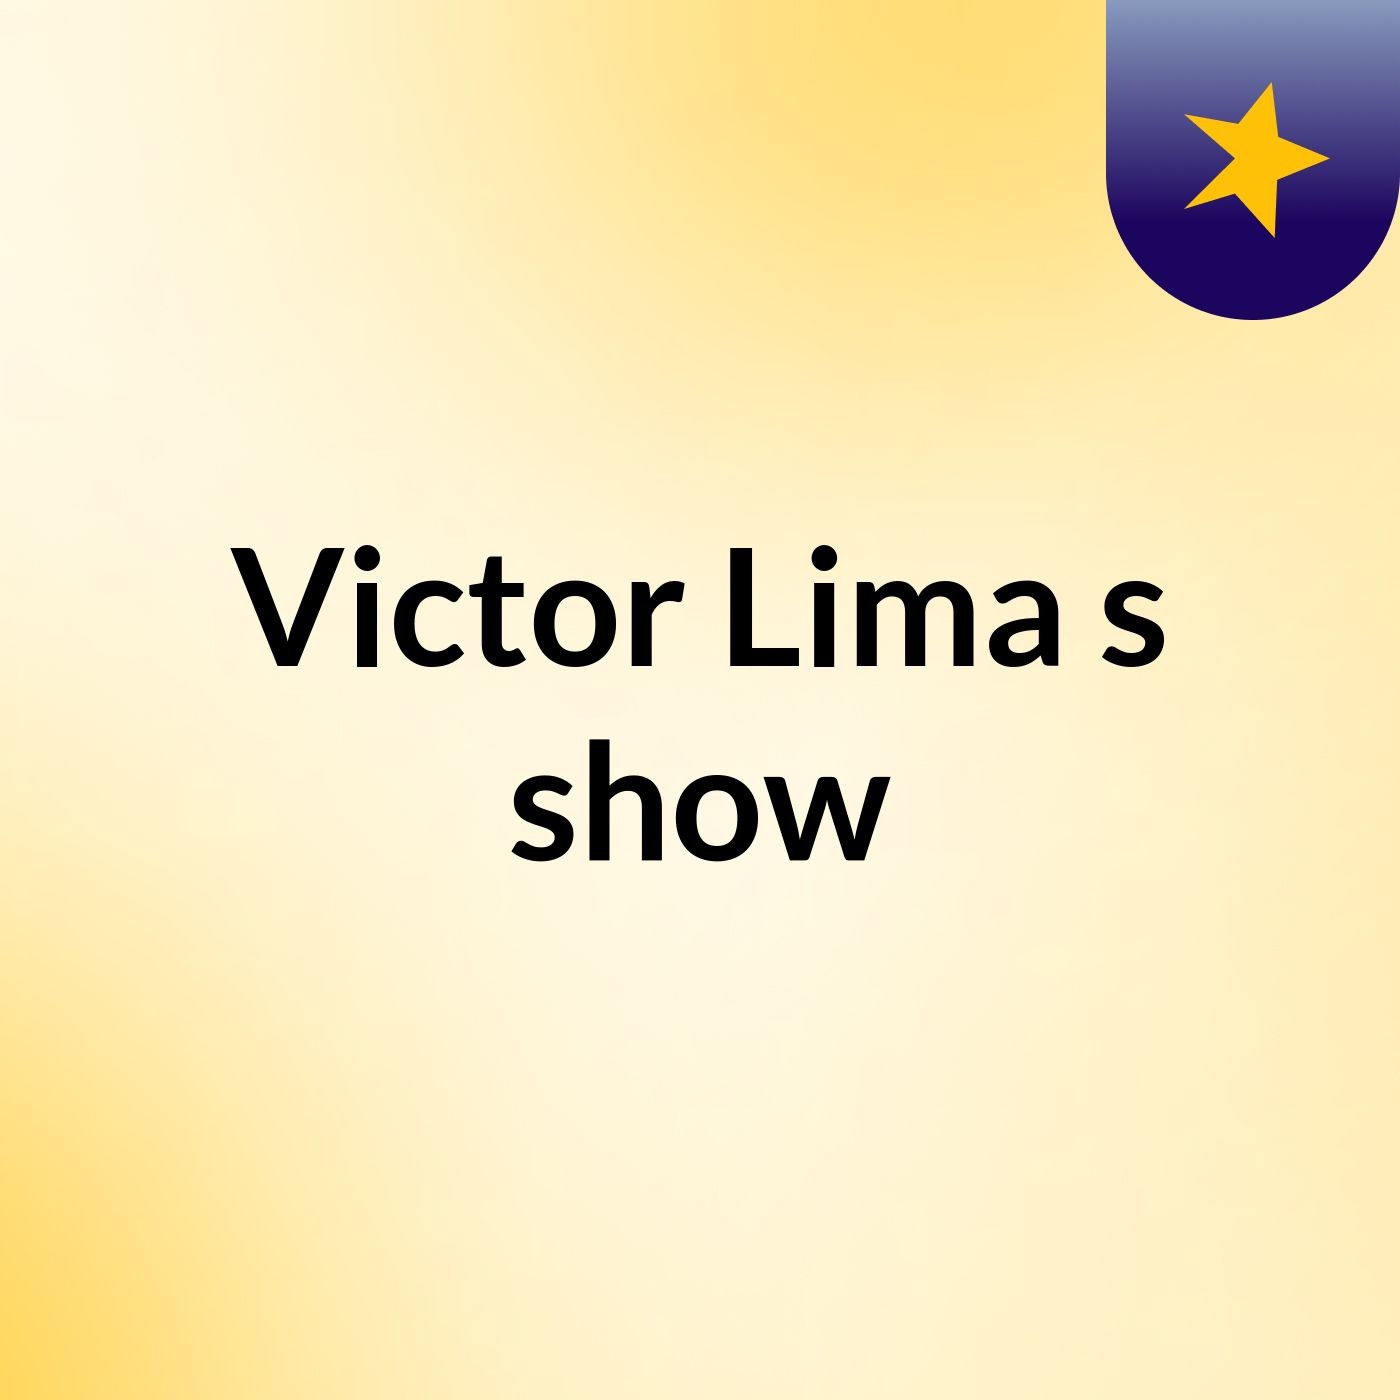 Victor Lima's show